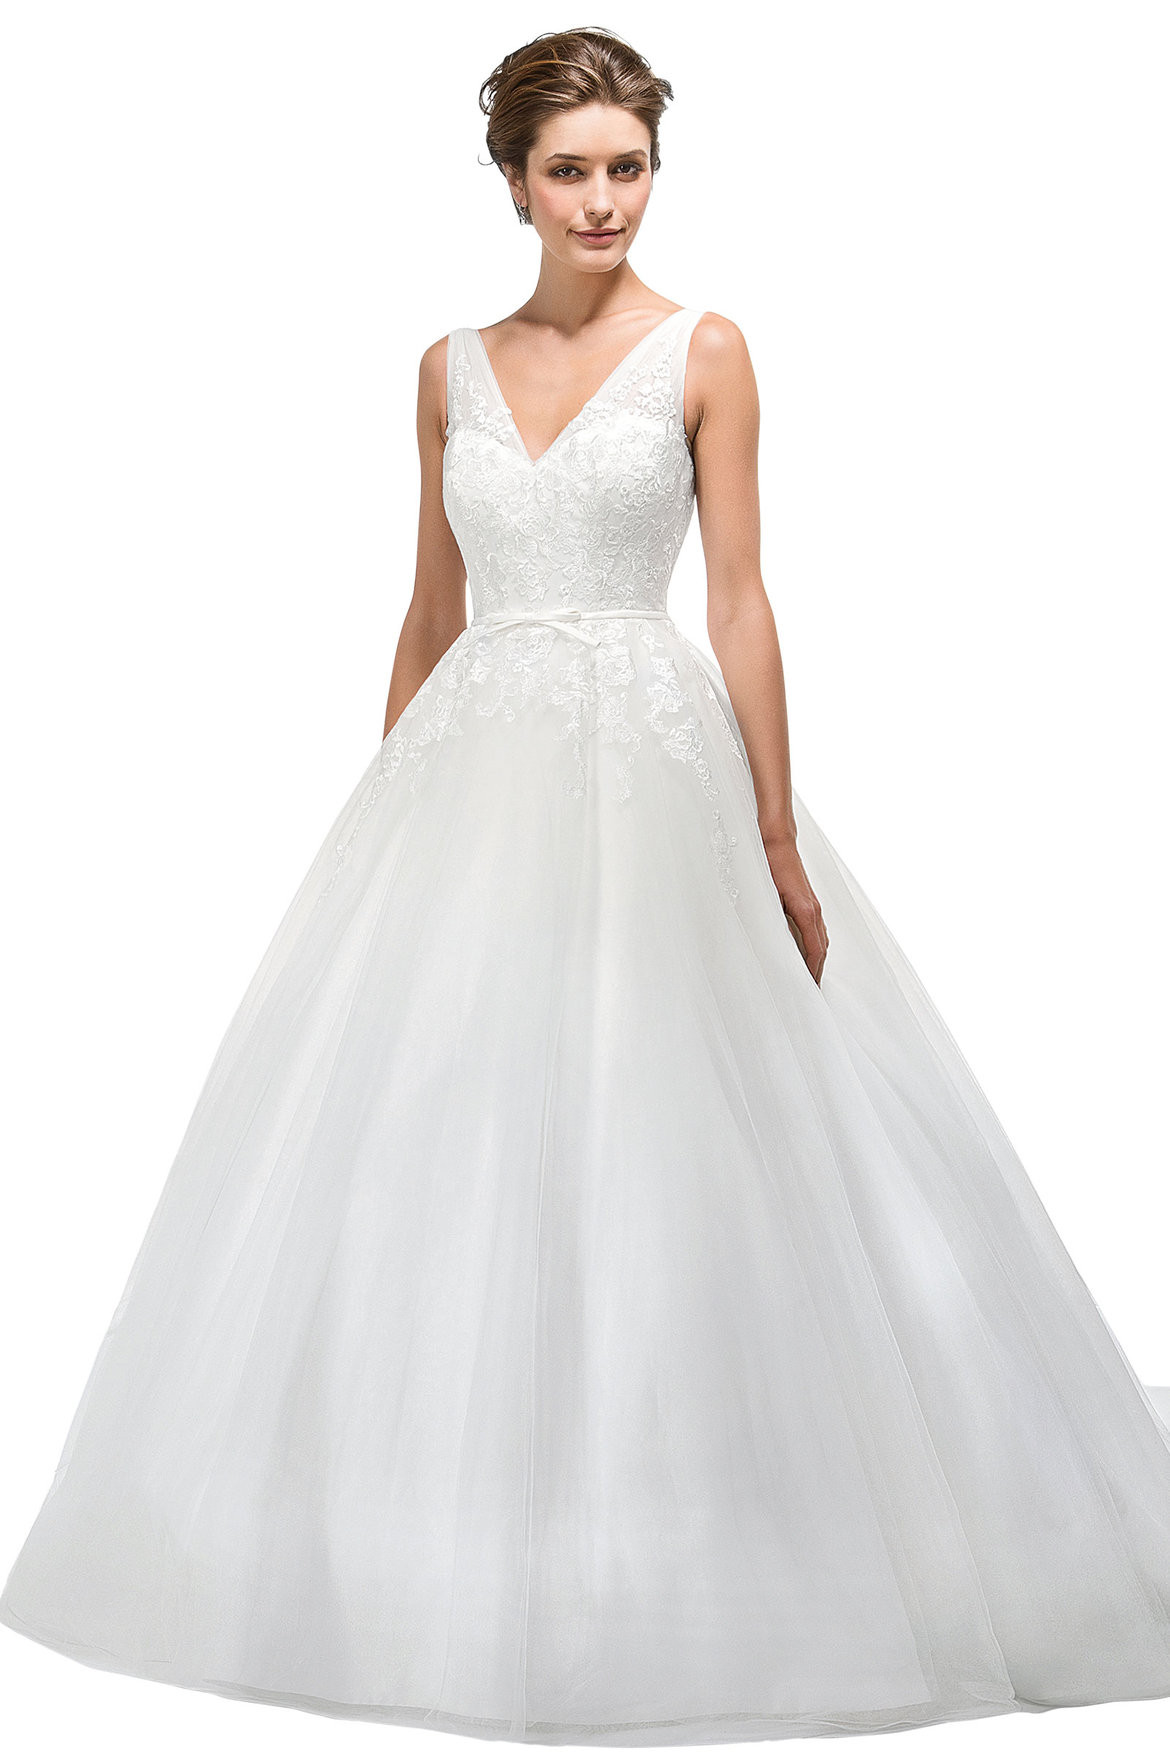 Wedding Dresses For Body Type
 Best Wedding Dress for Your Body Type Page 3